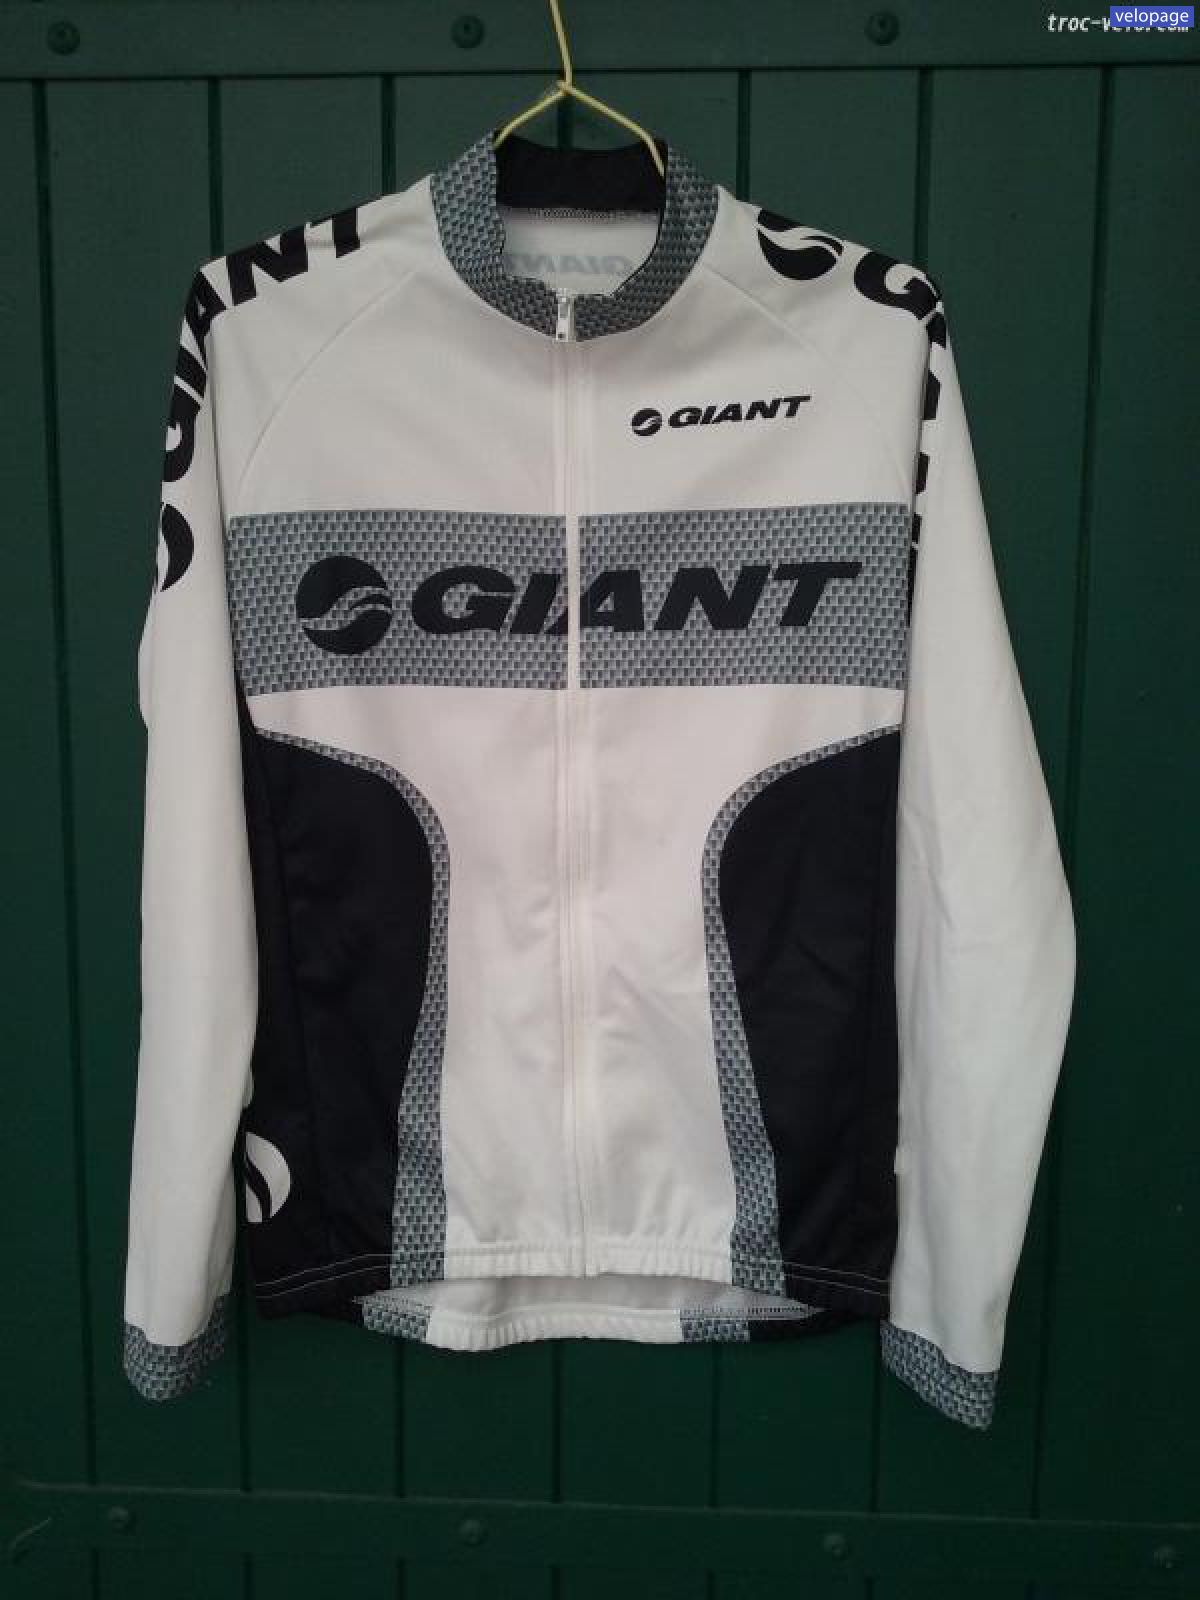 Giant taille s